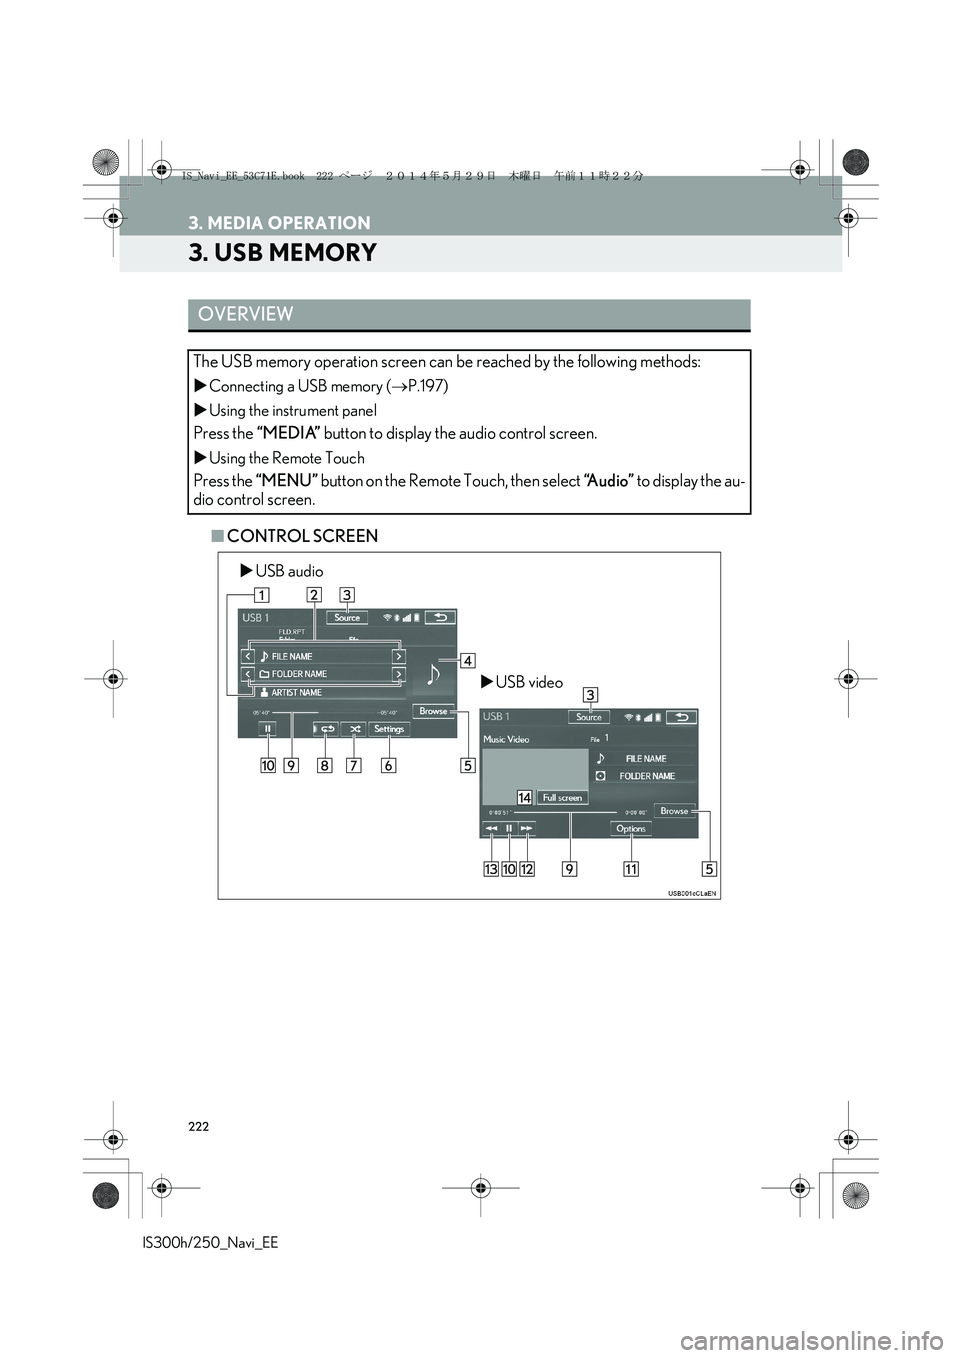 Lexus IS300h 2014  Navigation manual 222
3. MEDIA OPERATION
IS300h/250_Navi_EE
3. USB MEMORY
■CONTROL SCREEN
OVERVIEW
The USB memory operation screen can be reached by the following methods: 
�XConnecting a USB memory (→P.197)
�XUsin